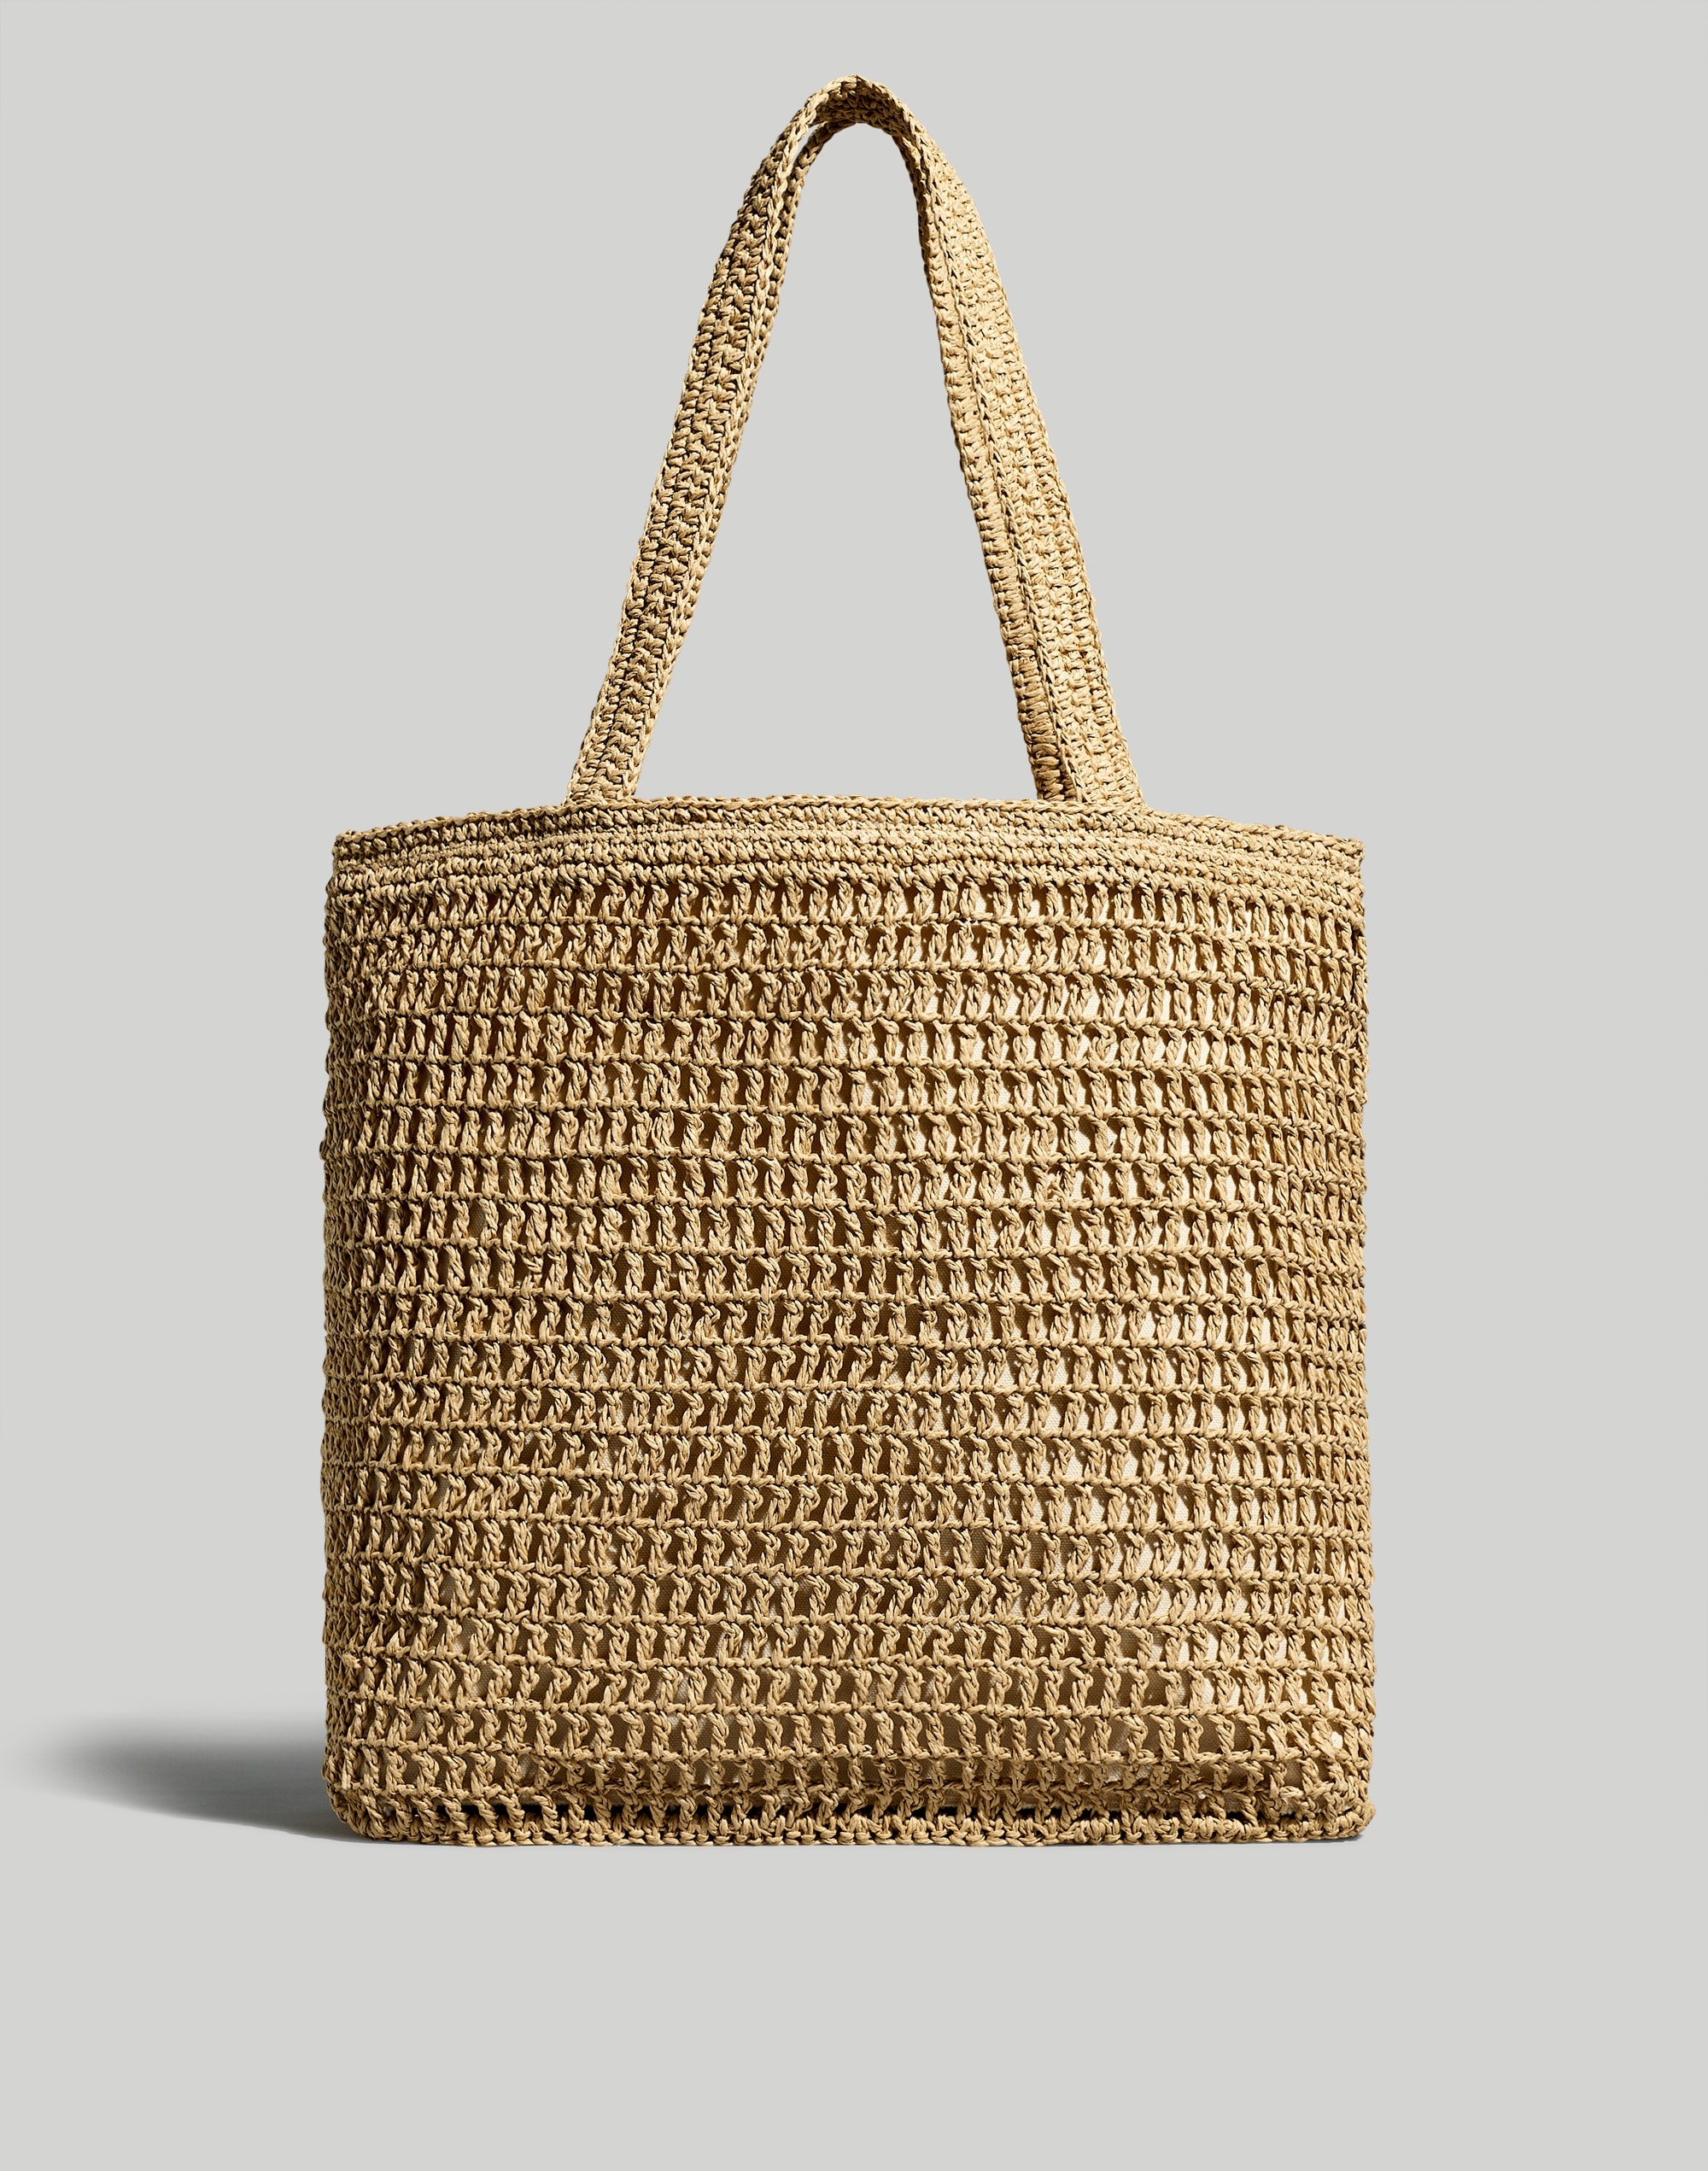 Mw The Transport Tote: Straw Edition In Desert Dune